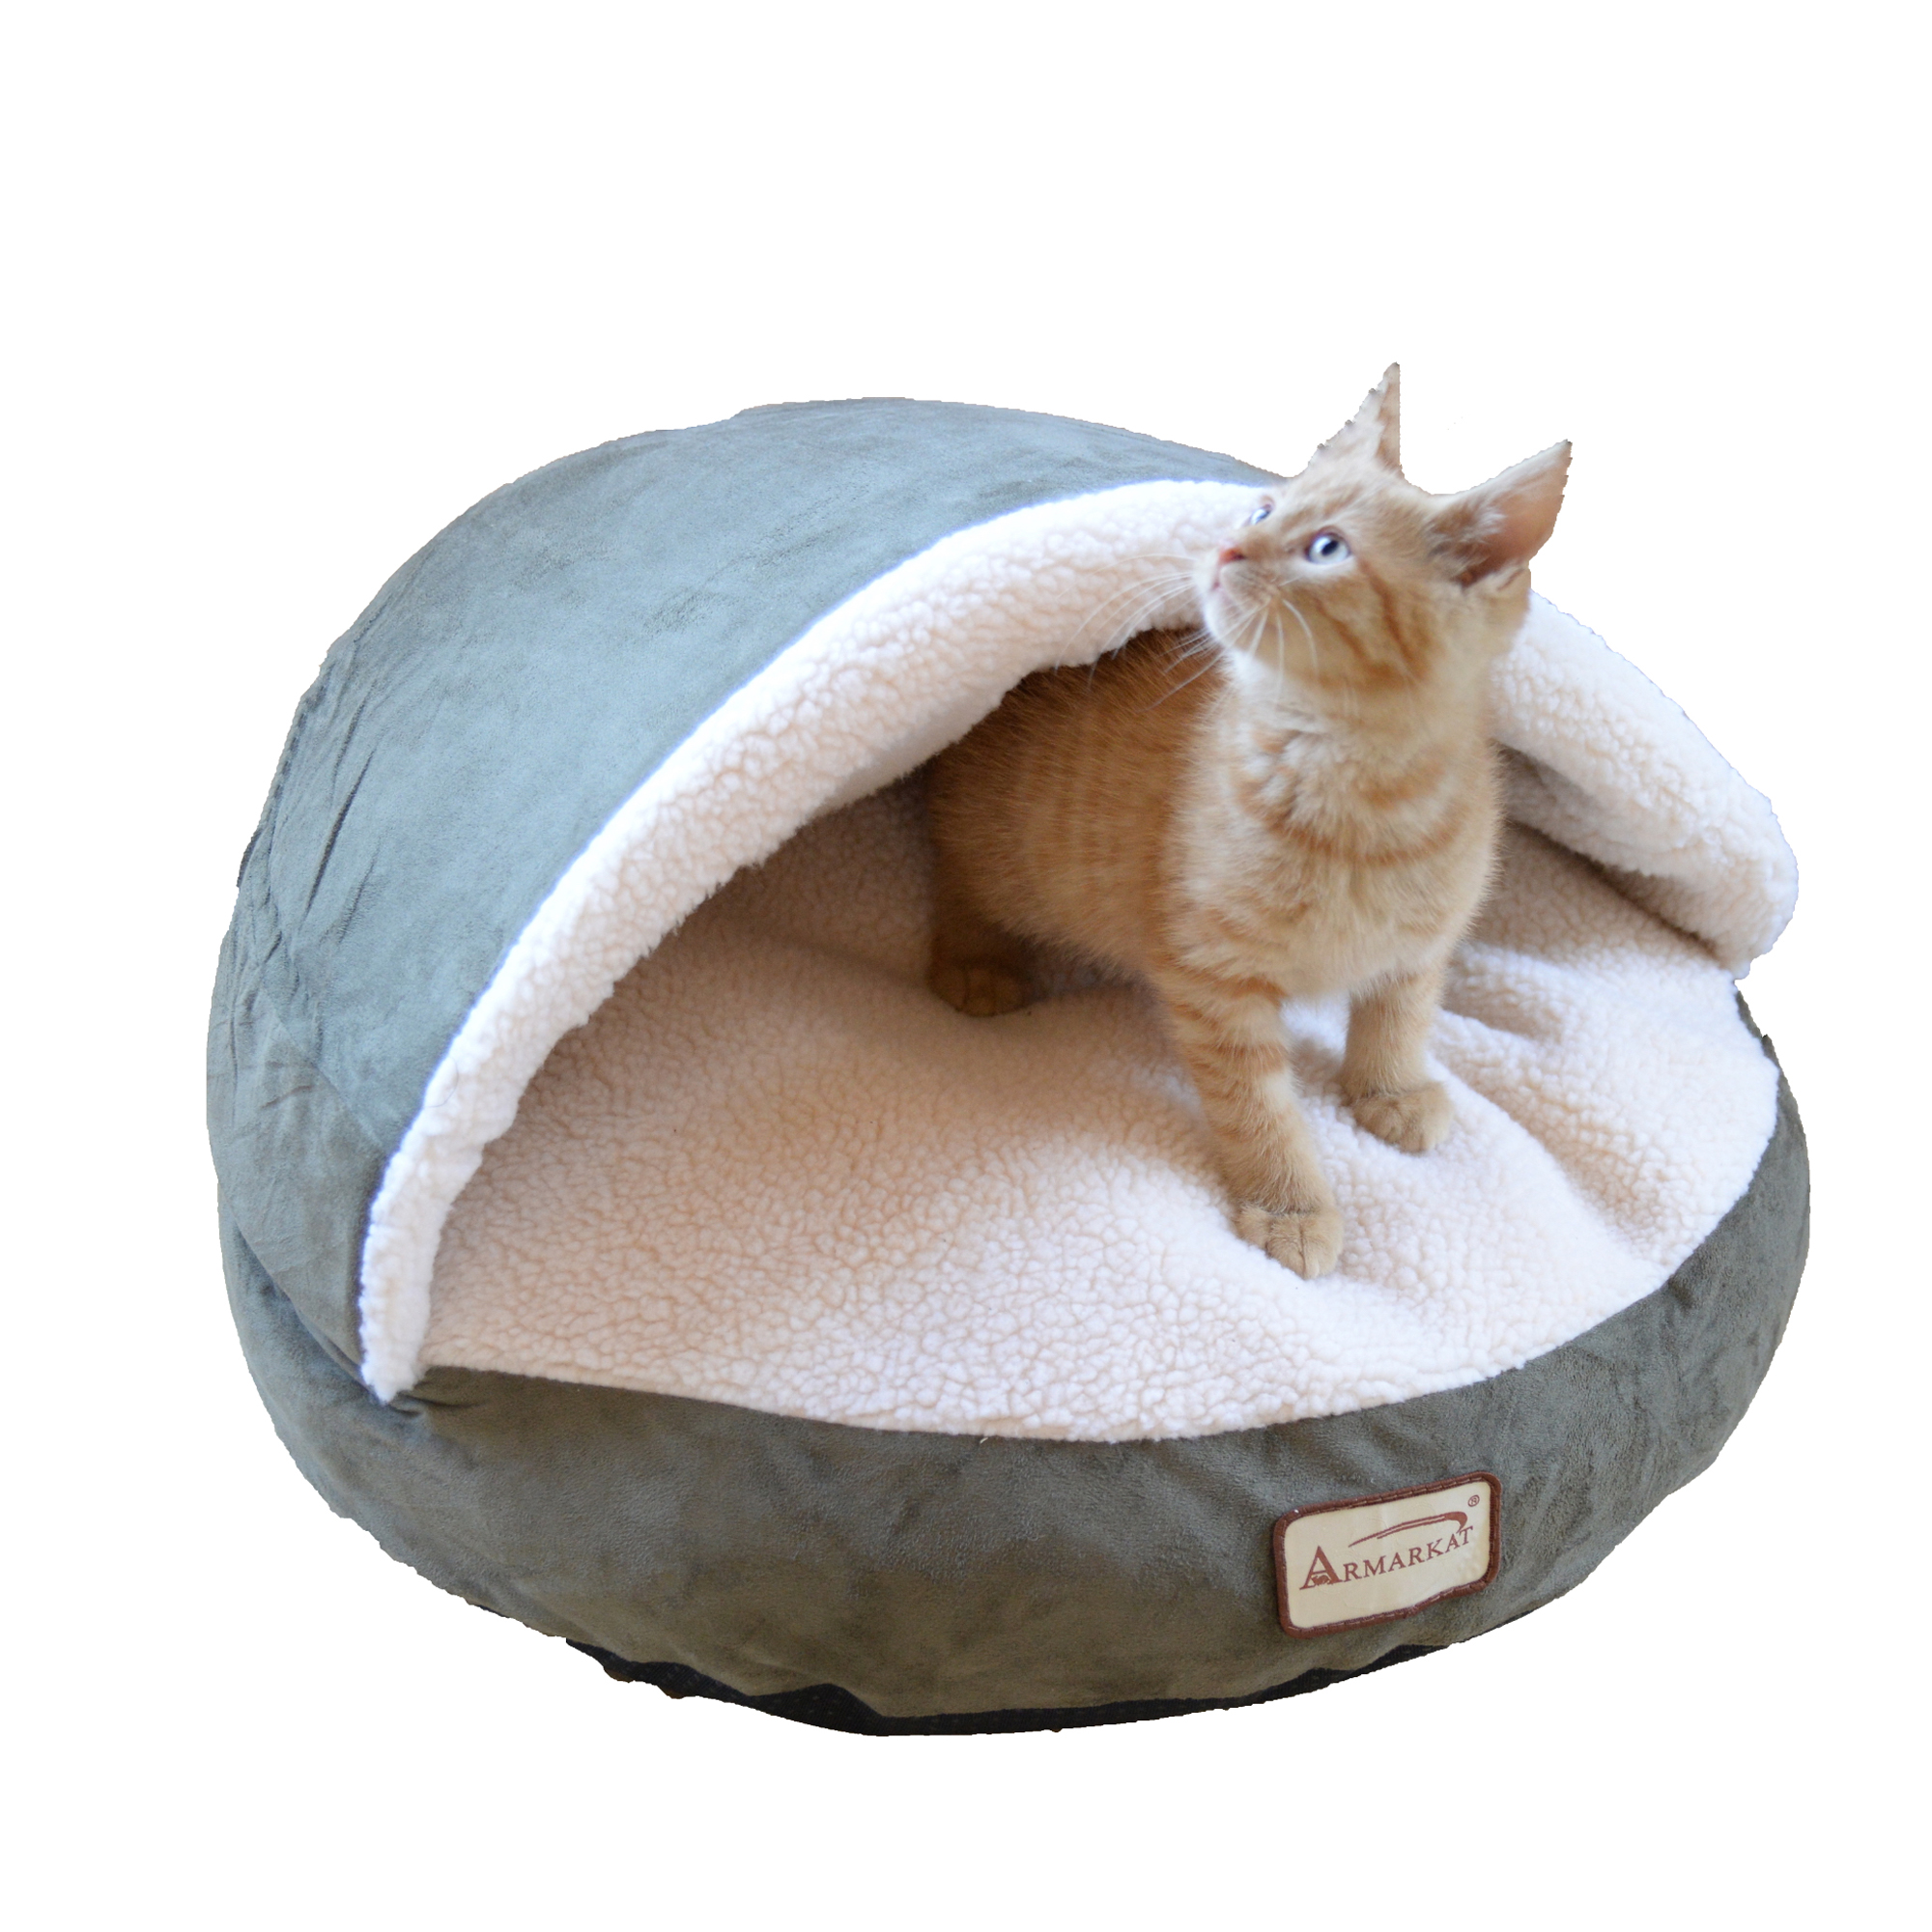 C31hml-mb Armarkat Cat Bed, Laurel Green And Ivory C31hml-mb